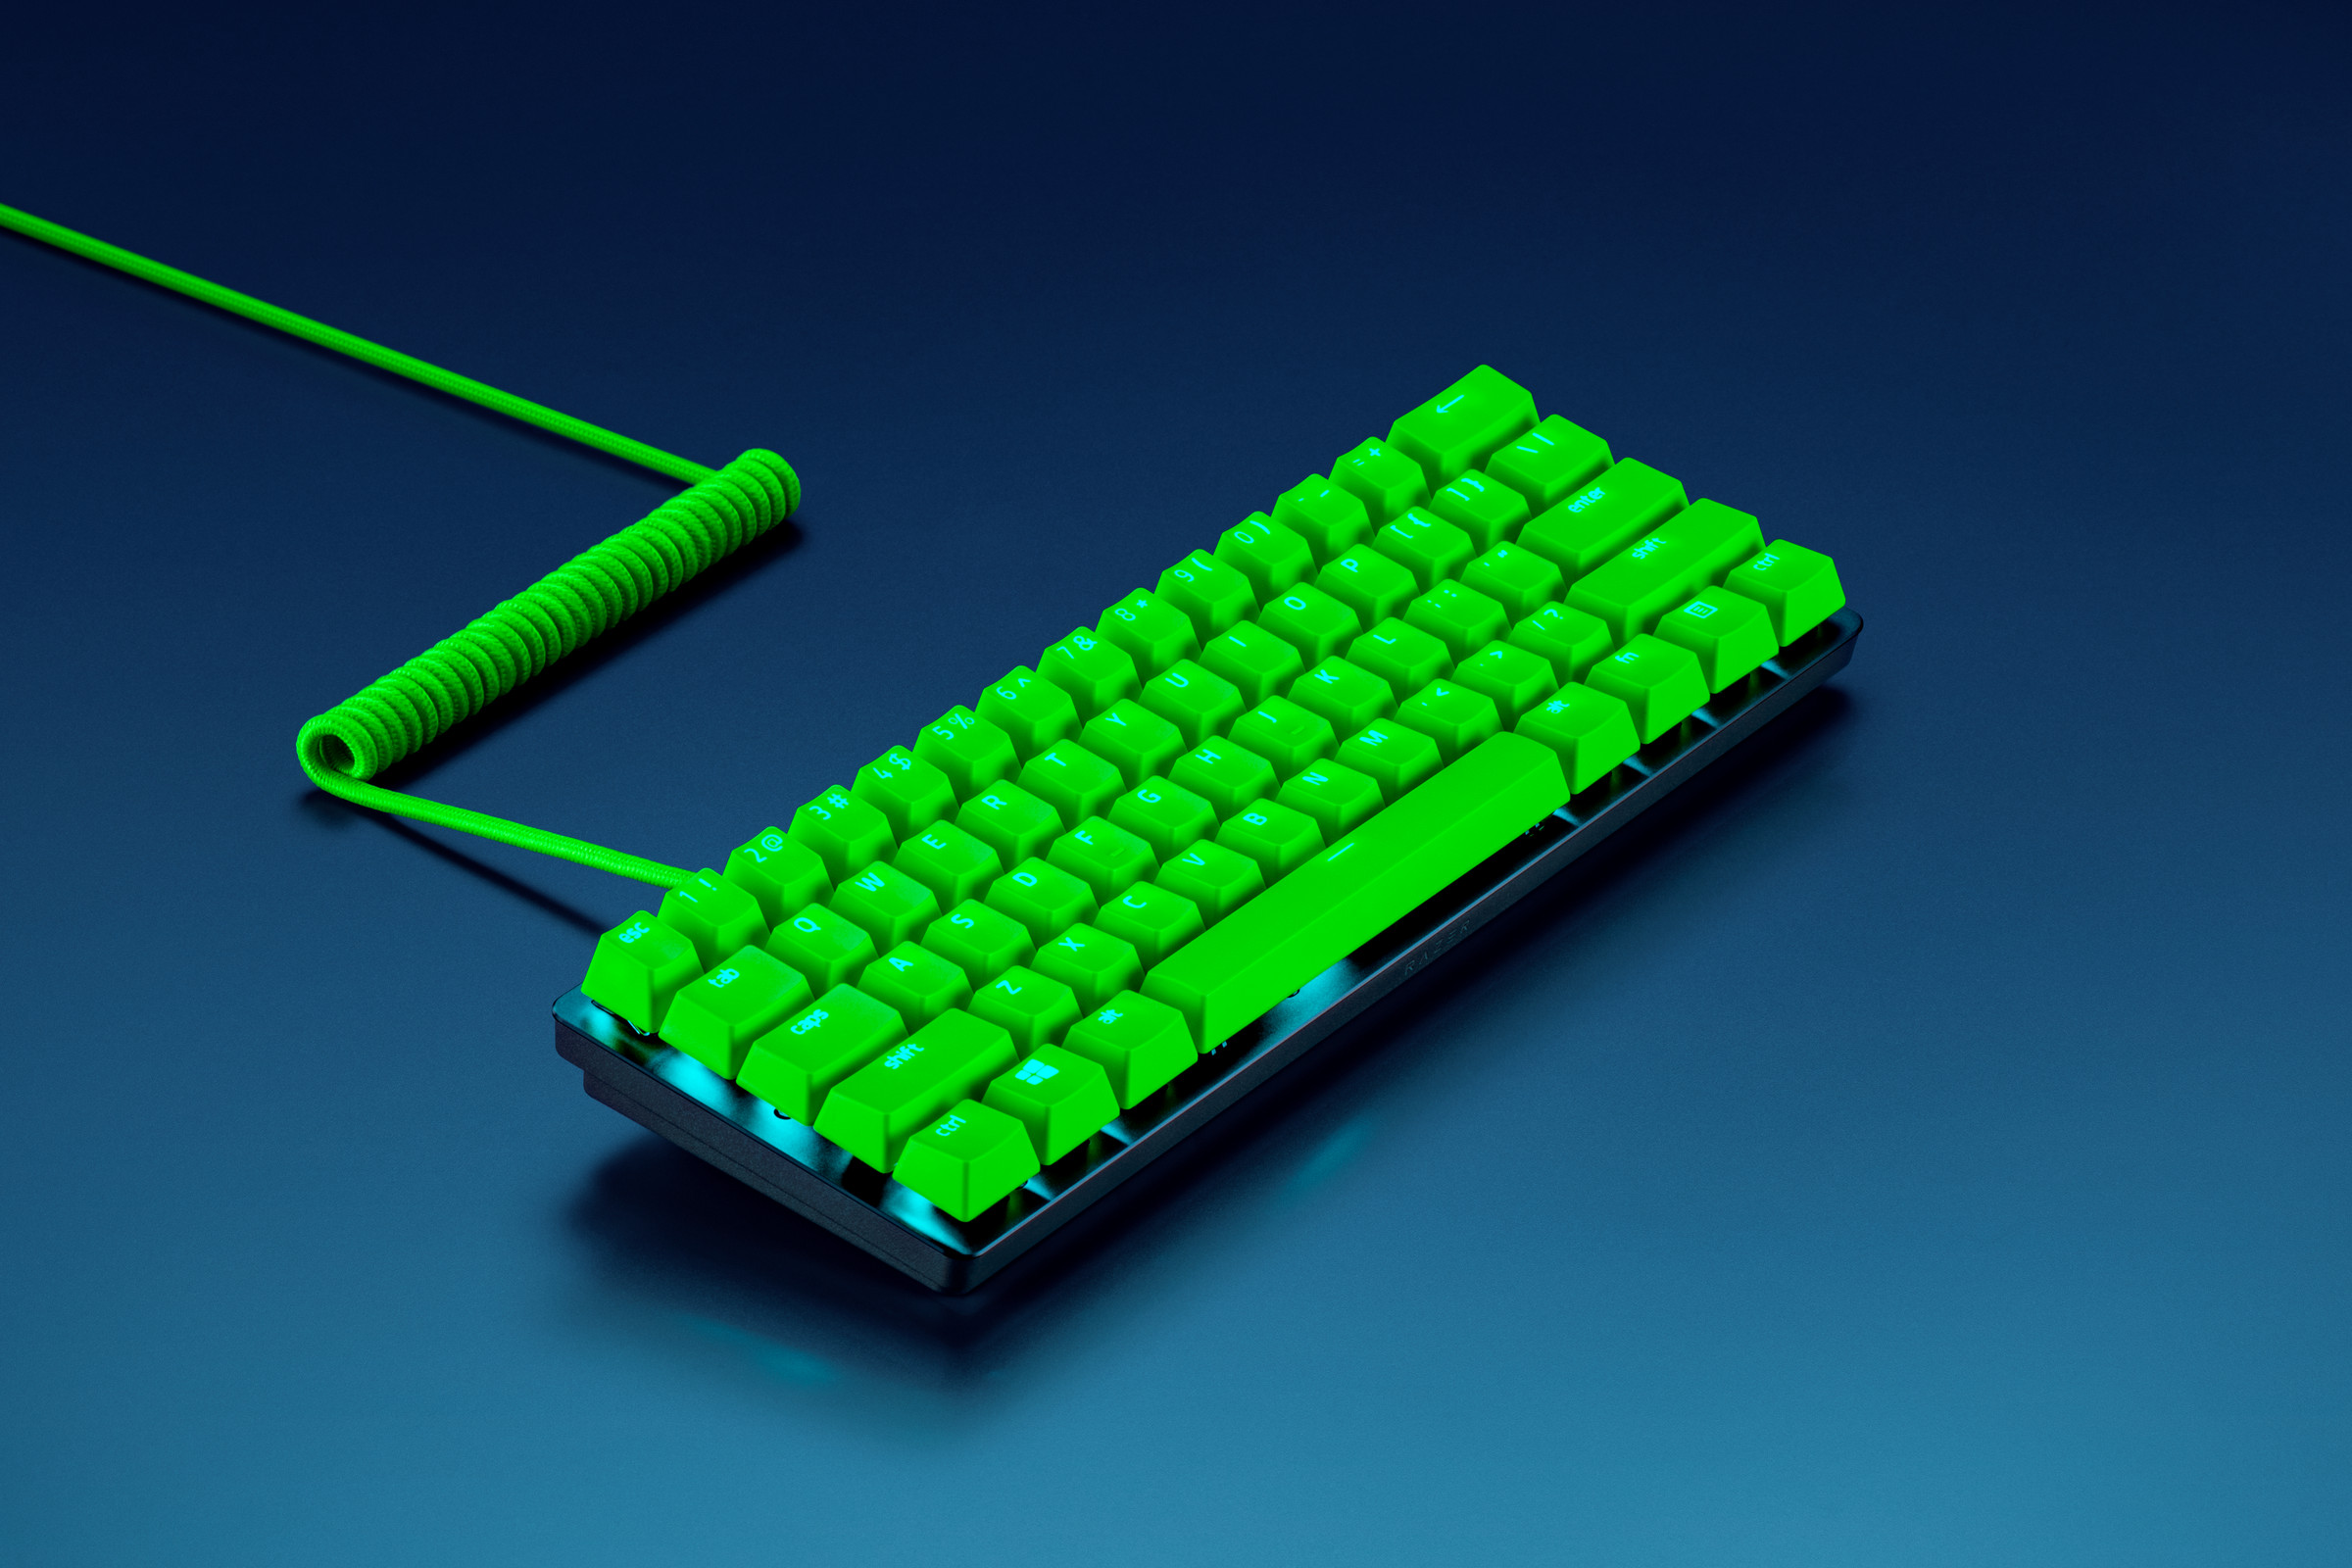 Razer’s PBT keycaps can now be bought with a matching USB cable.